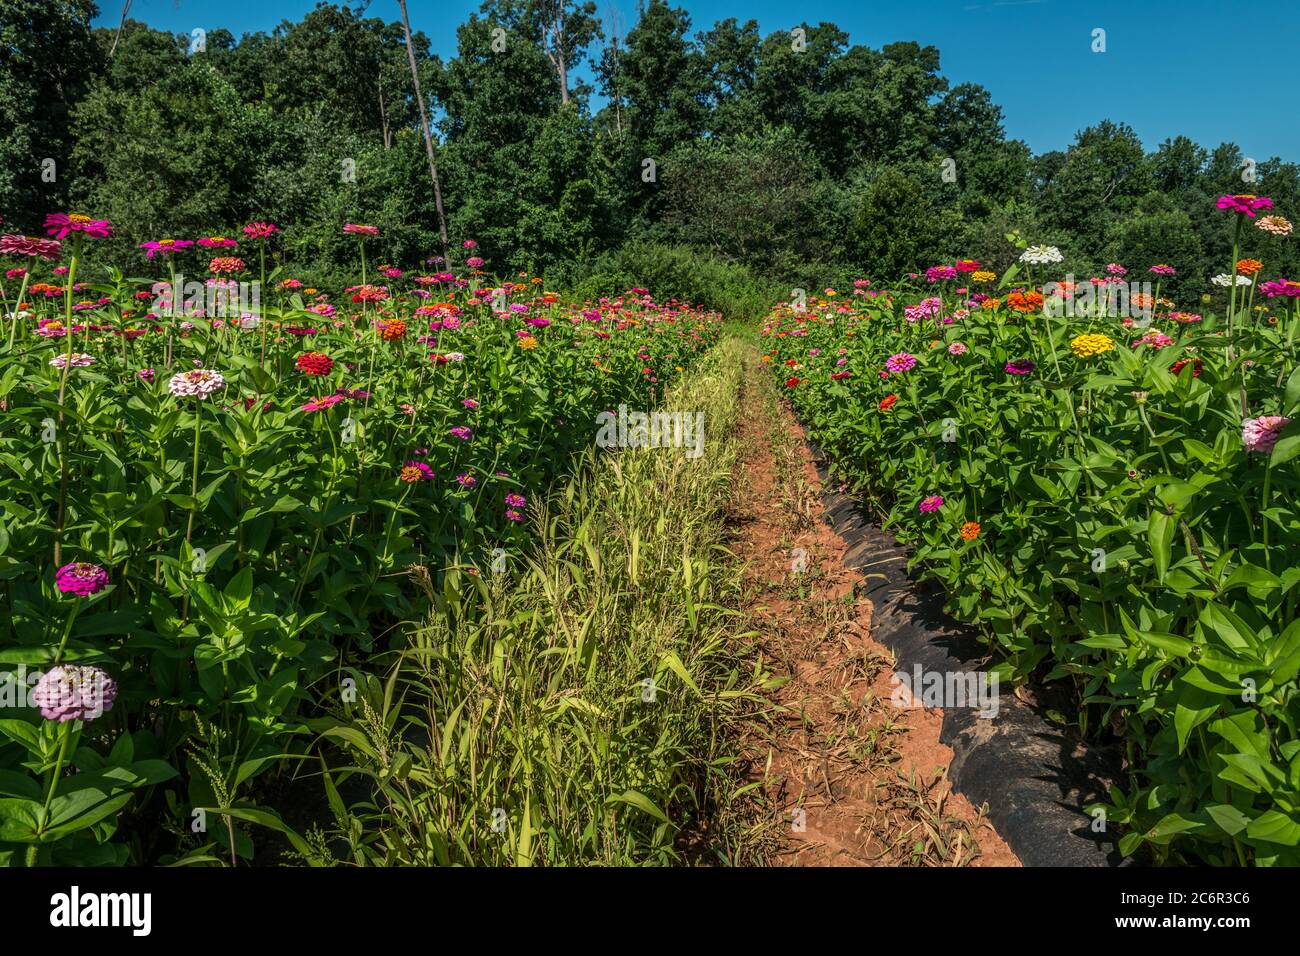 Rows of zinnias and dahlias mixed together in a farm field full of bright vibrant colors in the summertime sun Stock Photo